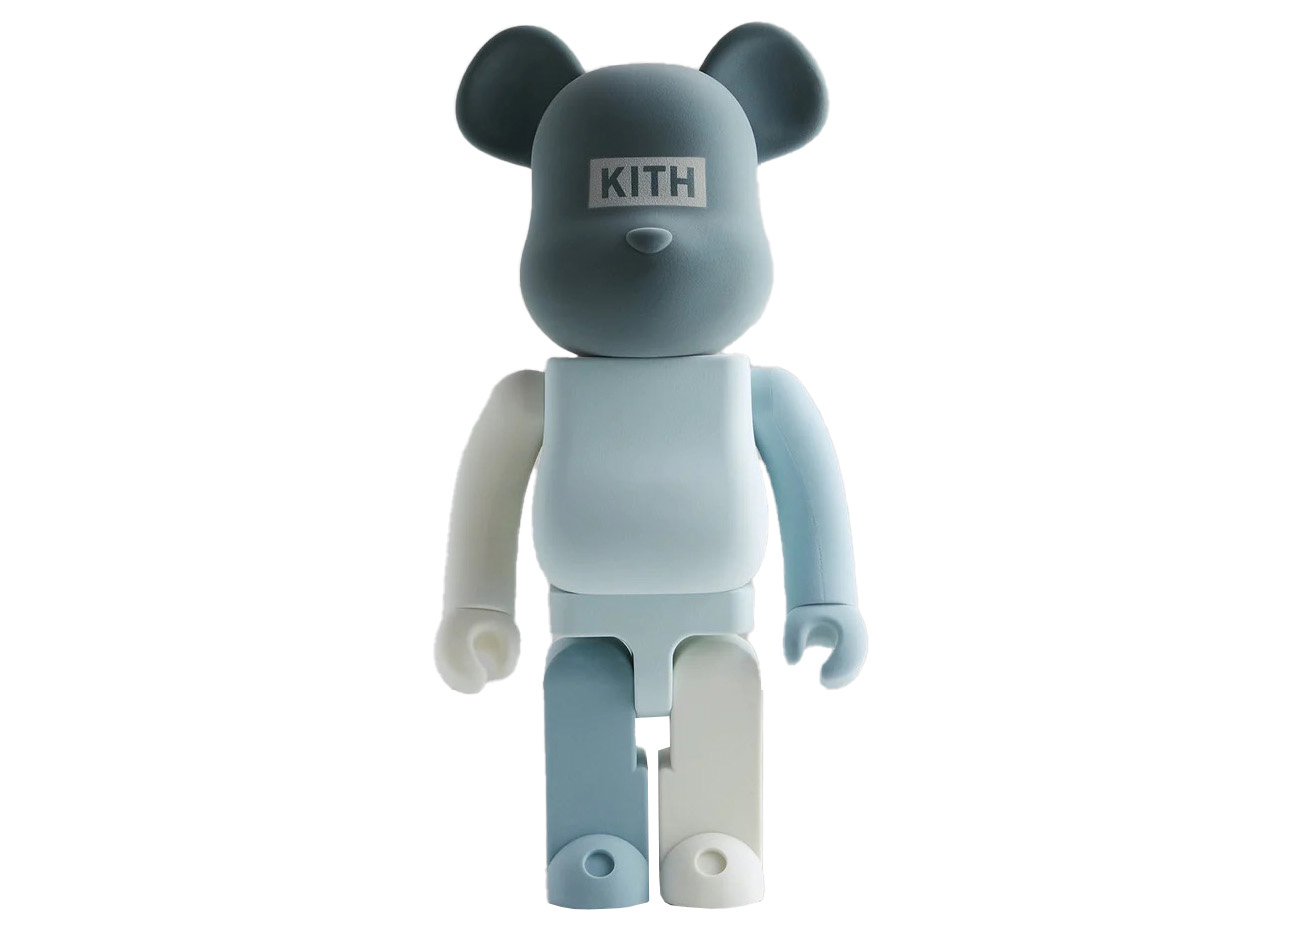 Kith ベアブリック　The Palette 1000%